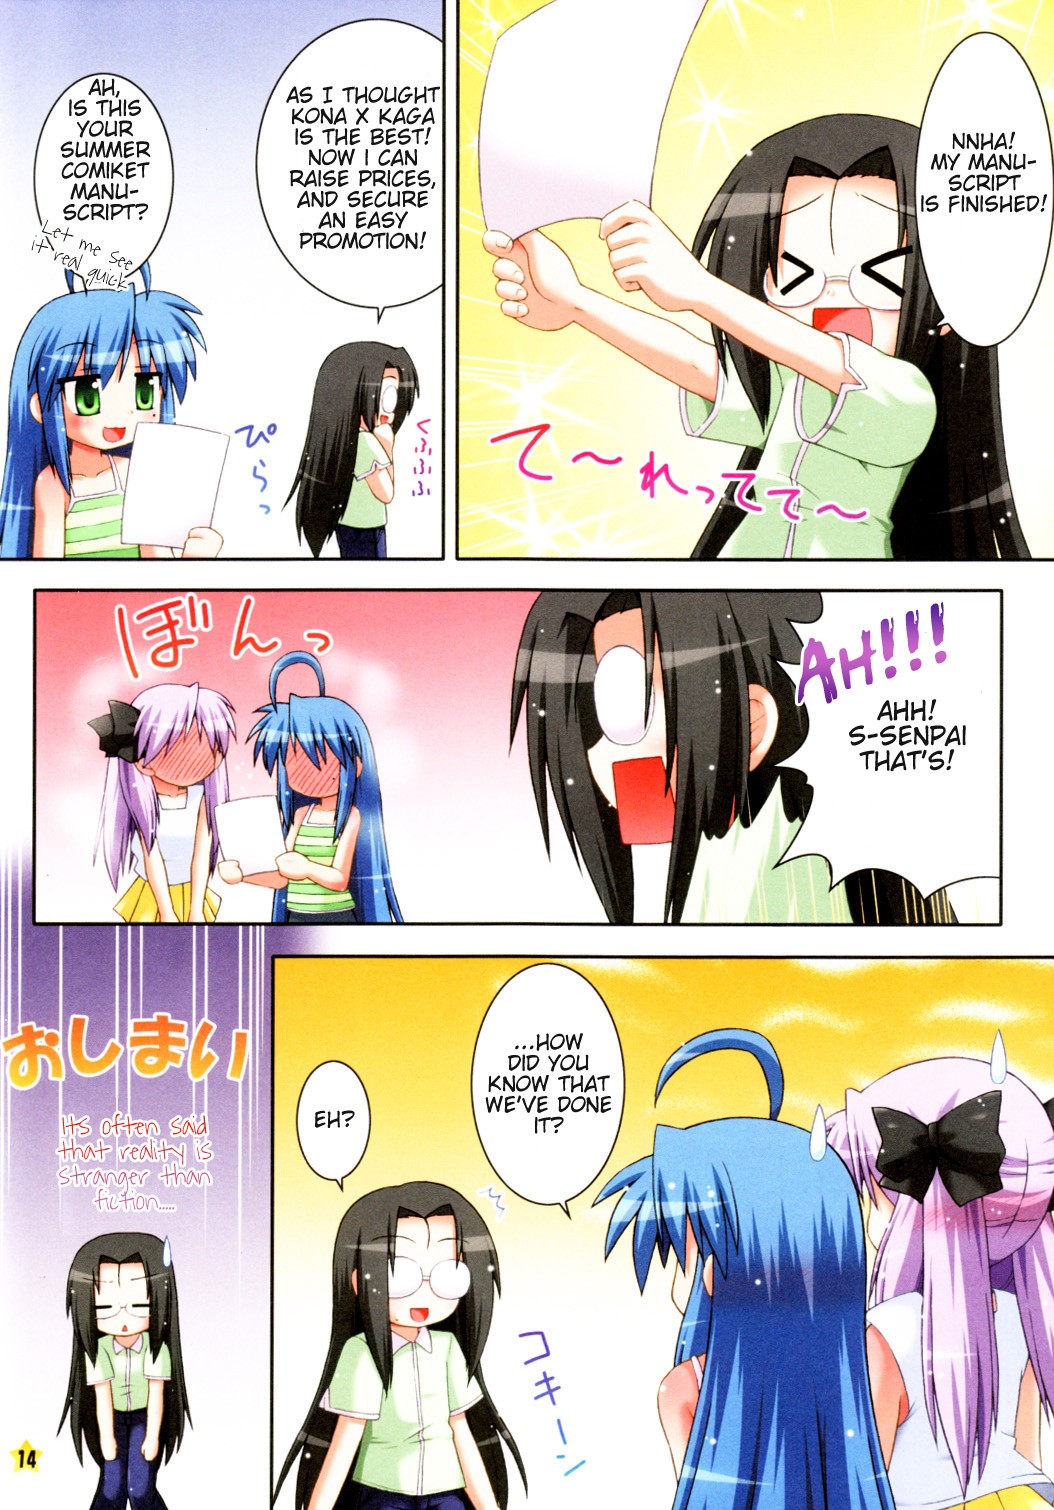 Do you know how to do it? hentai manga picture 14